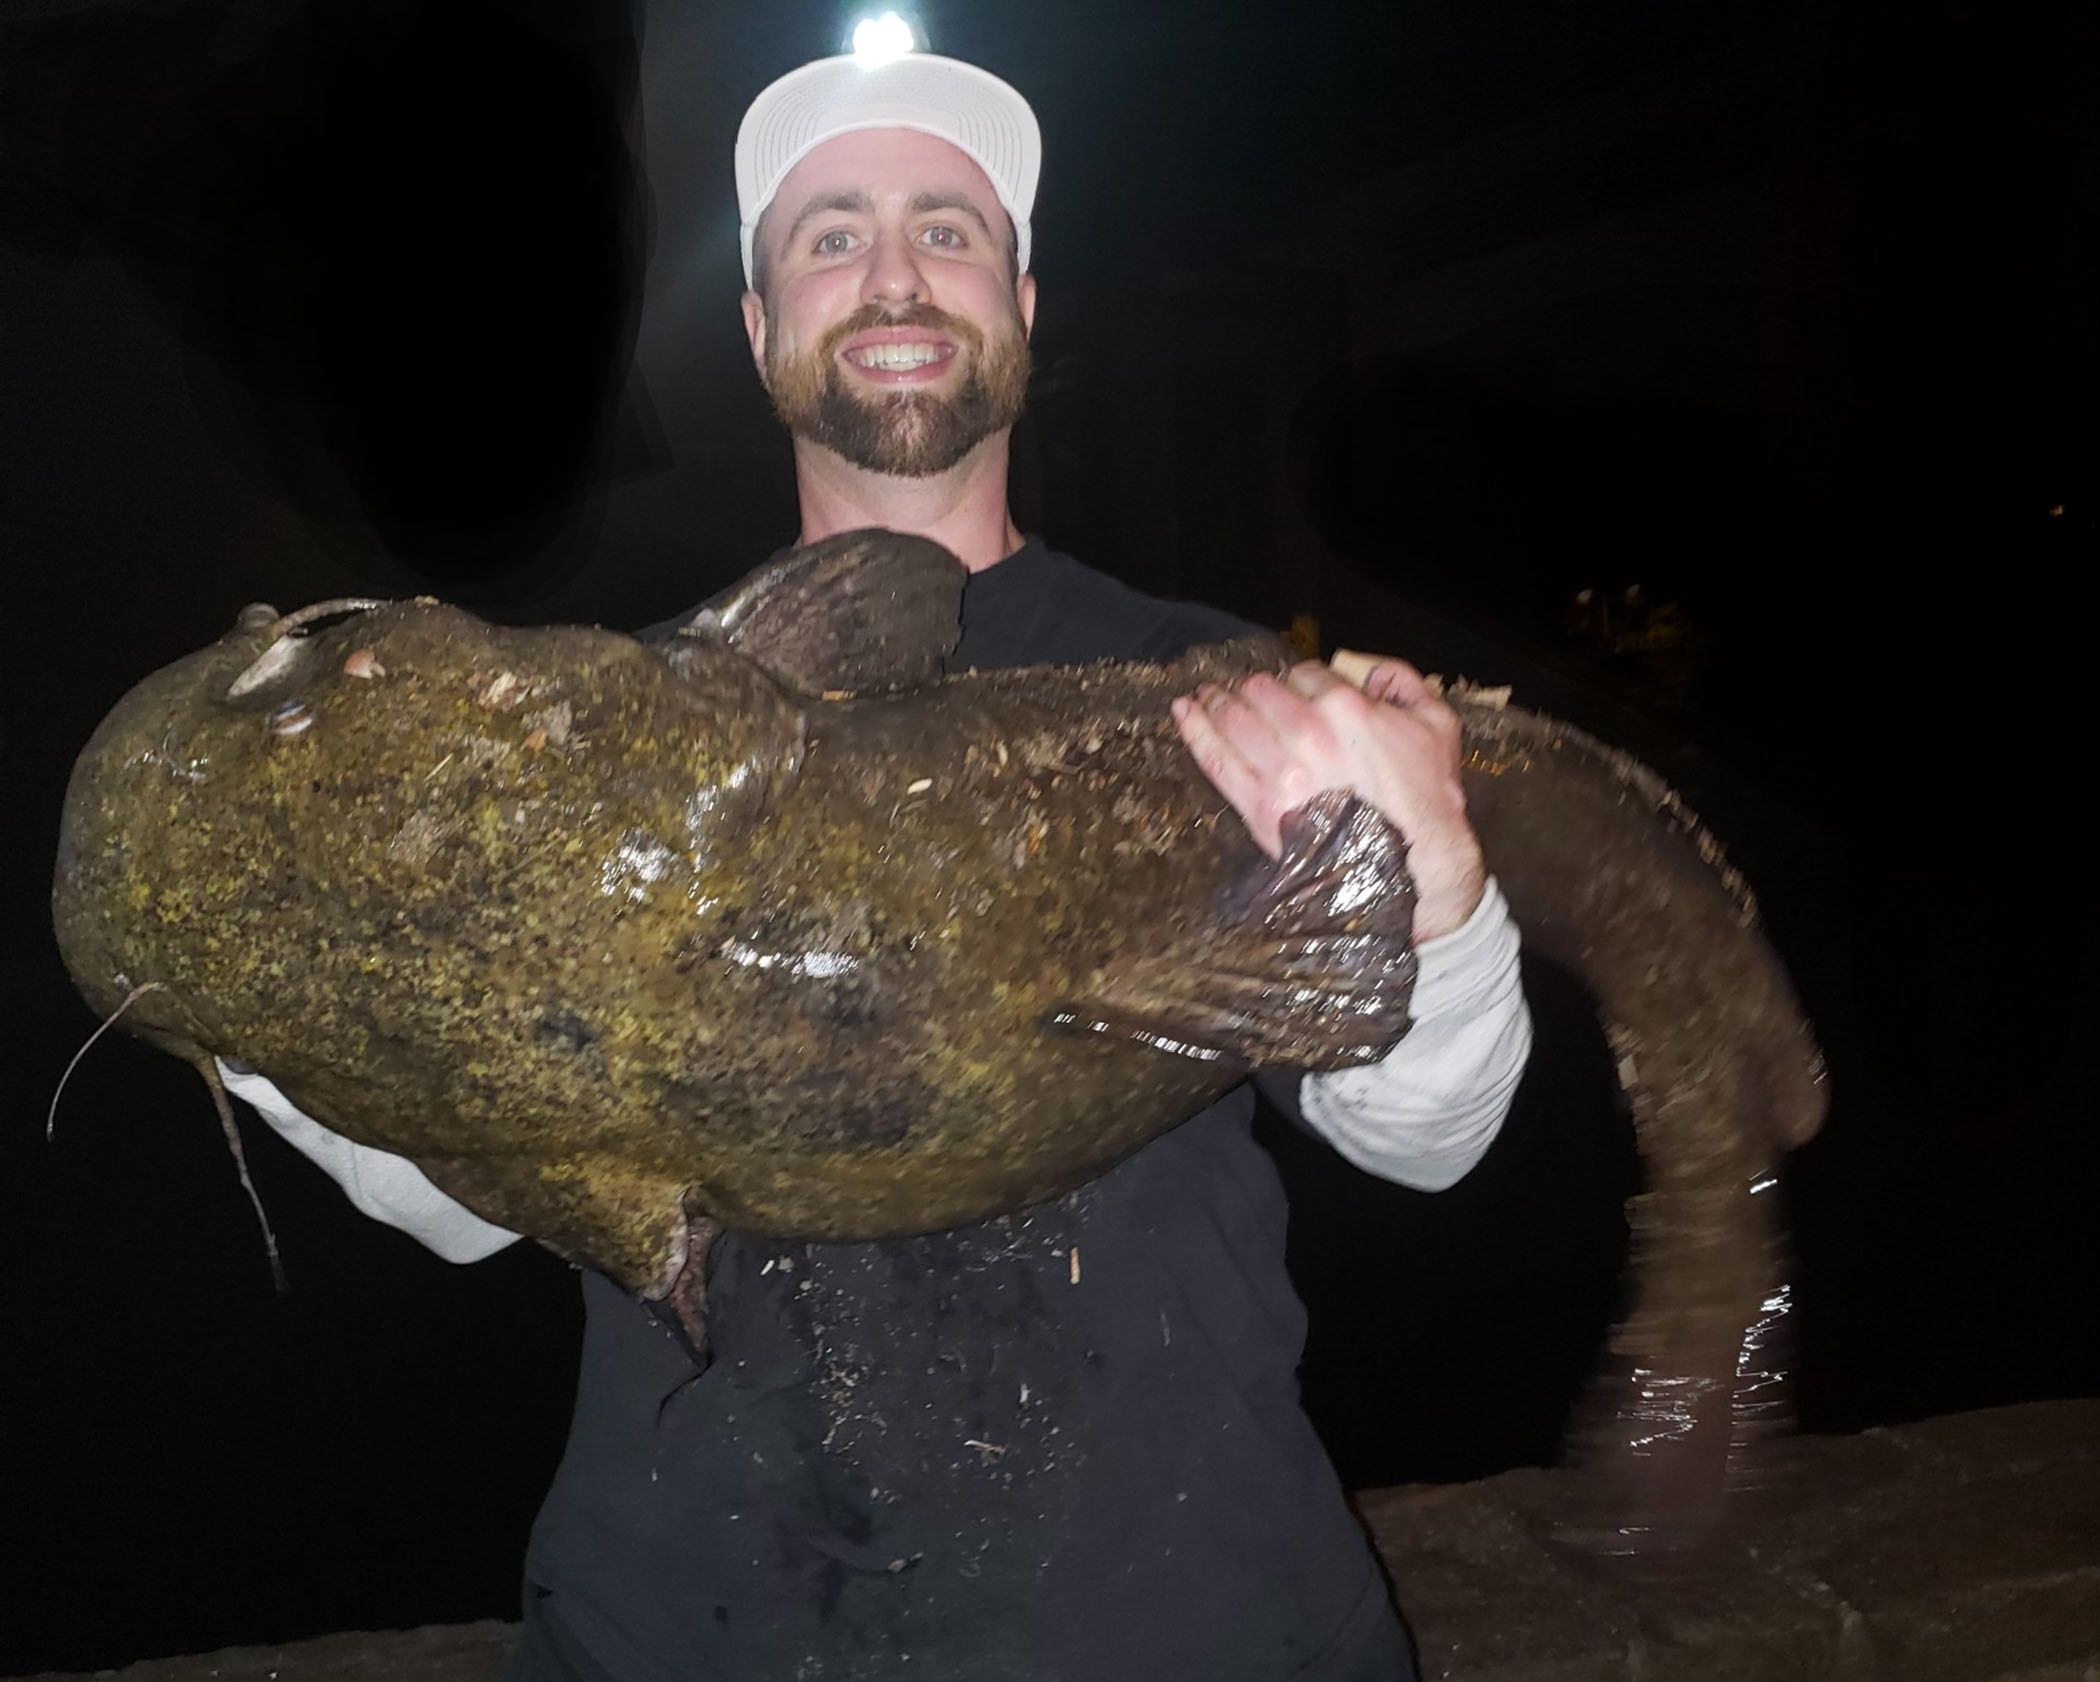 It's official. River monster is new top fish for Pennsylvania